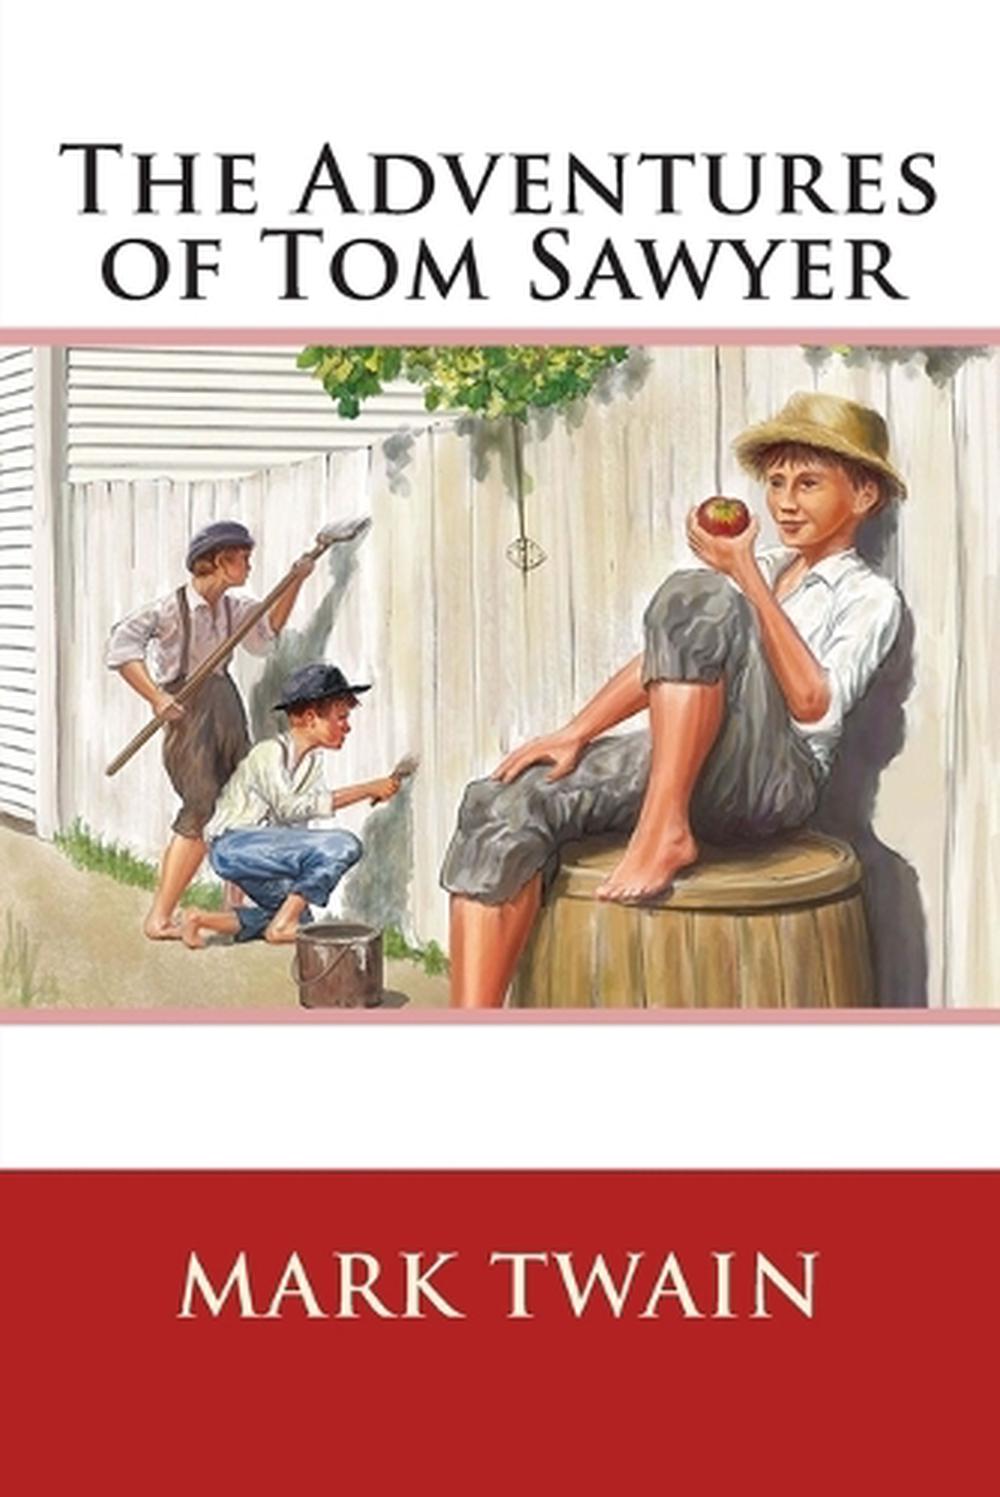 book review of the story adventures of tom sawyer